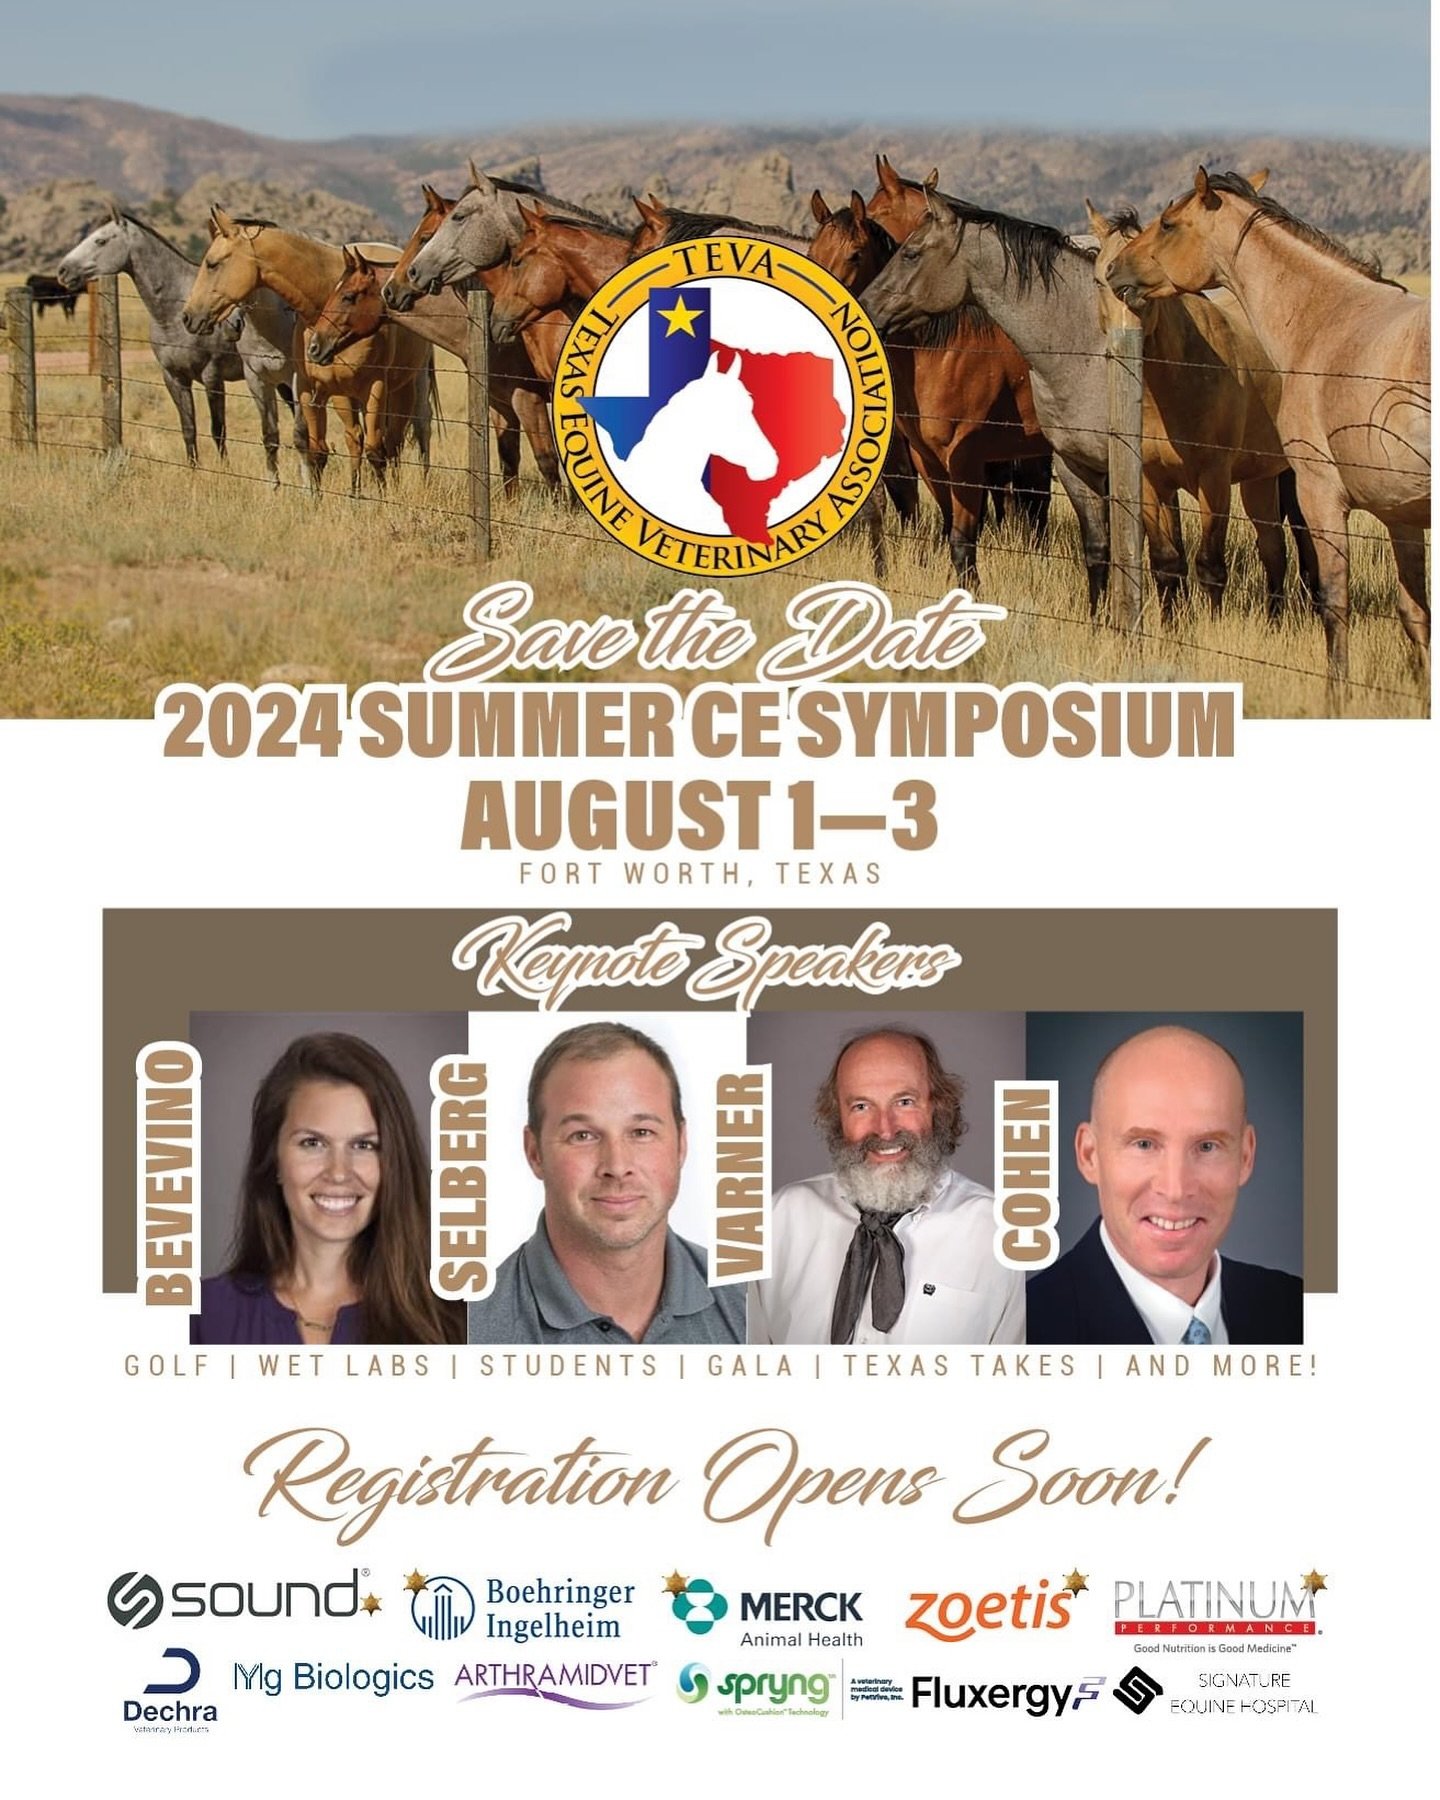 Registration Opening Soon! Renew your TEVA membership today to make sure you&rsquo;re on the email list when Registration opens! Wet Labs are limited in size are first come-first served for spots. 

www.texasequineva.com